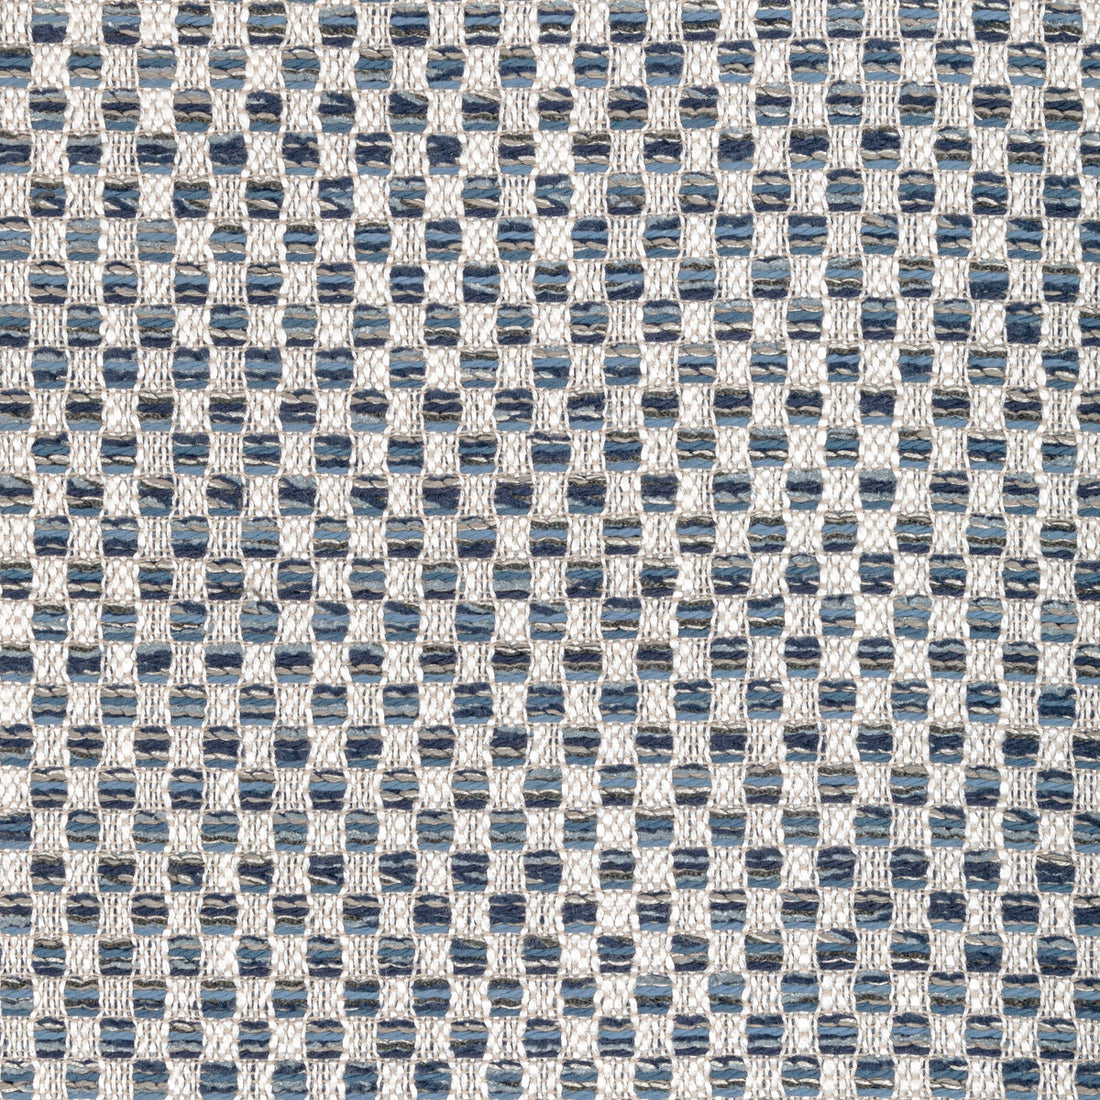 Kravet Design fabric in 36410-5 color - pattern 36410.5.0 - by Kravet Design in the Performance Crypton Home collection